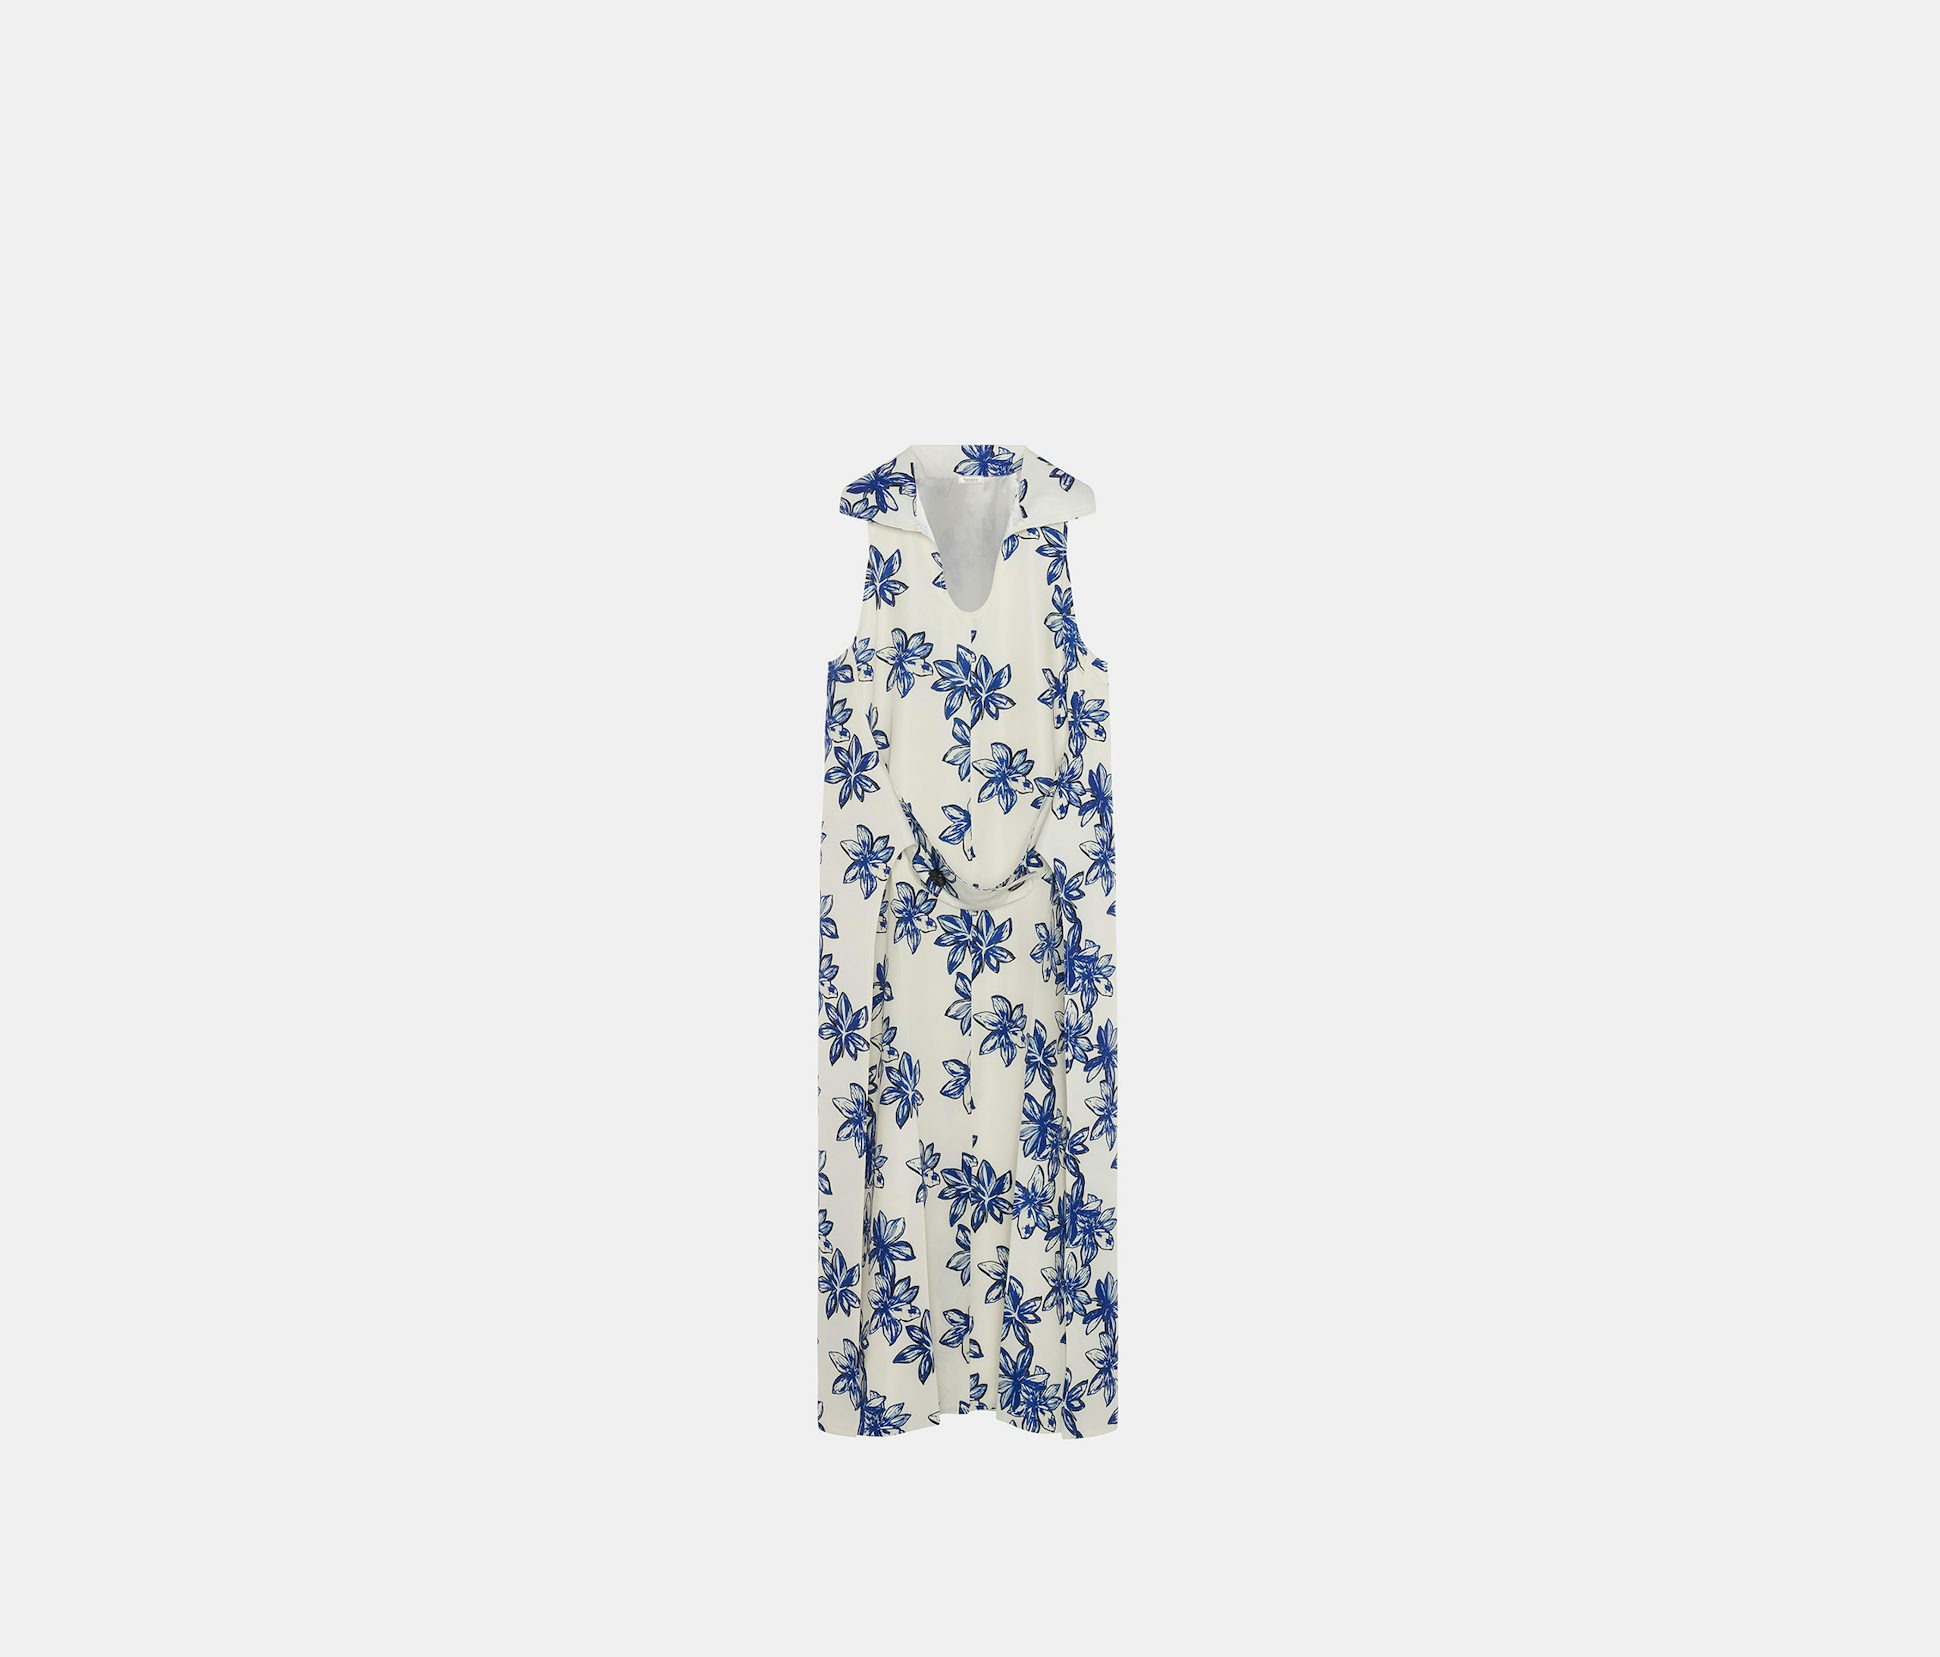 Sleeveless dress open at the sides and tied at the front in lotus flower print - Nina Ricci